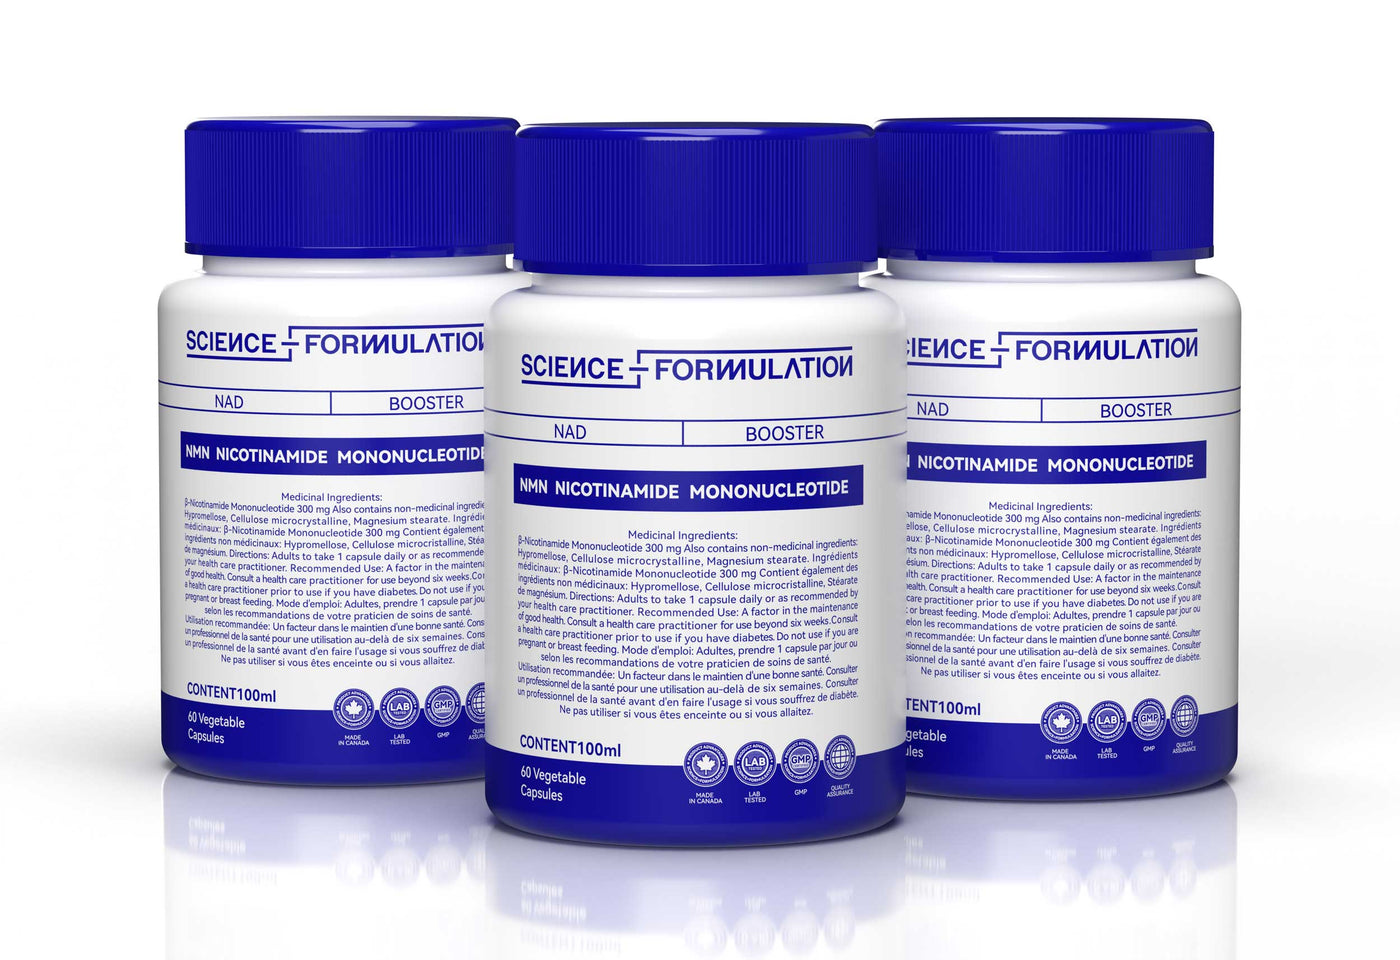 SCIENCE FORMULATION NMN 300mg - Highest Potency Available - Premium Supplement - Cellular Health - Boost NAD+, Supports Longevity - 99.9% Pure - Fast Absorption